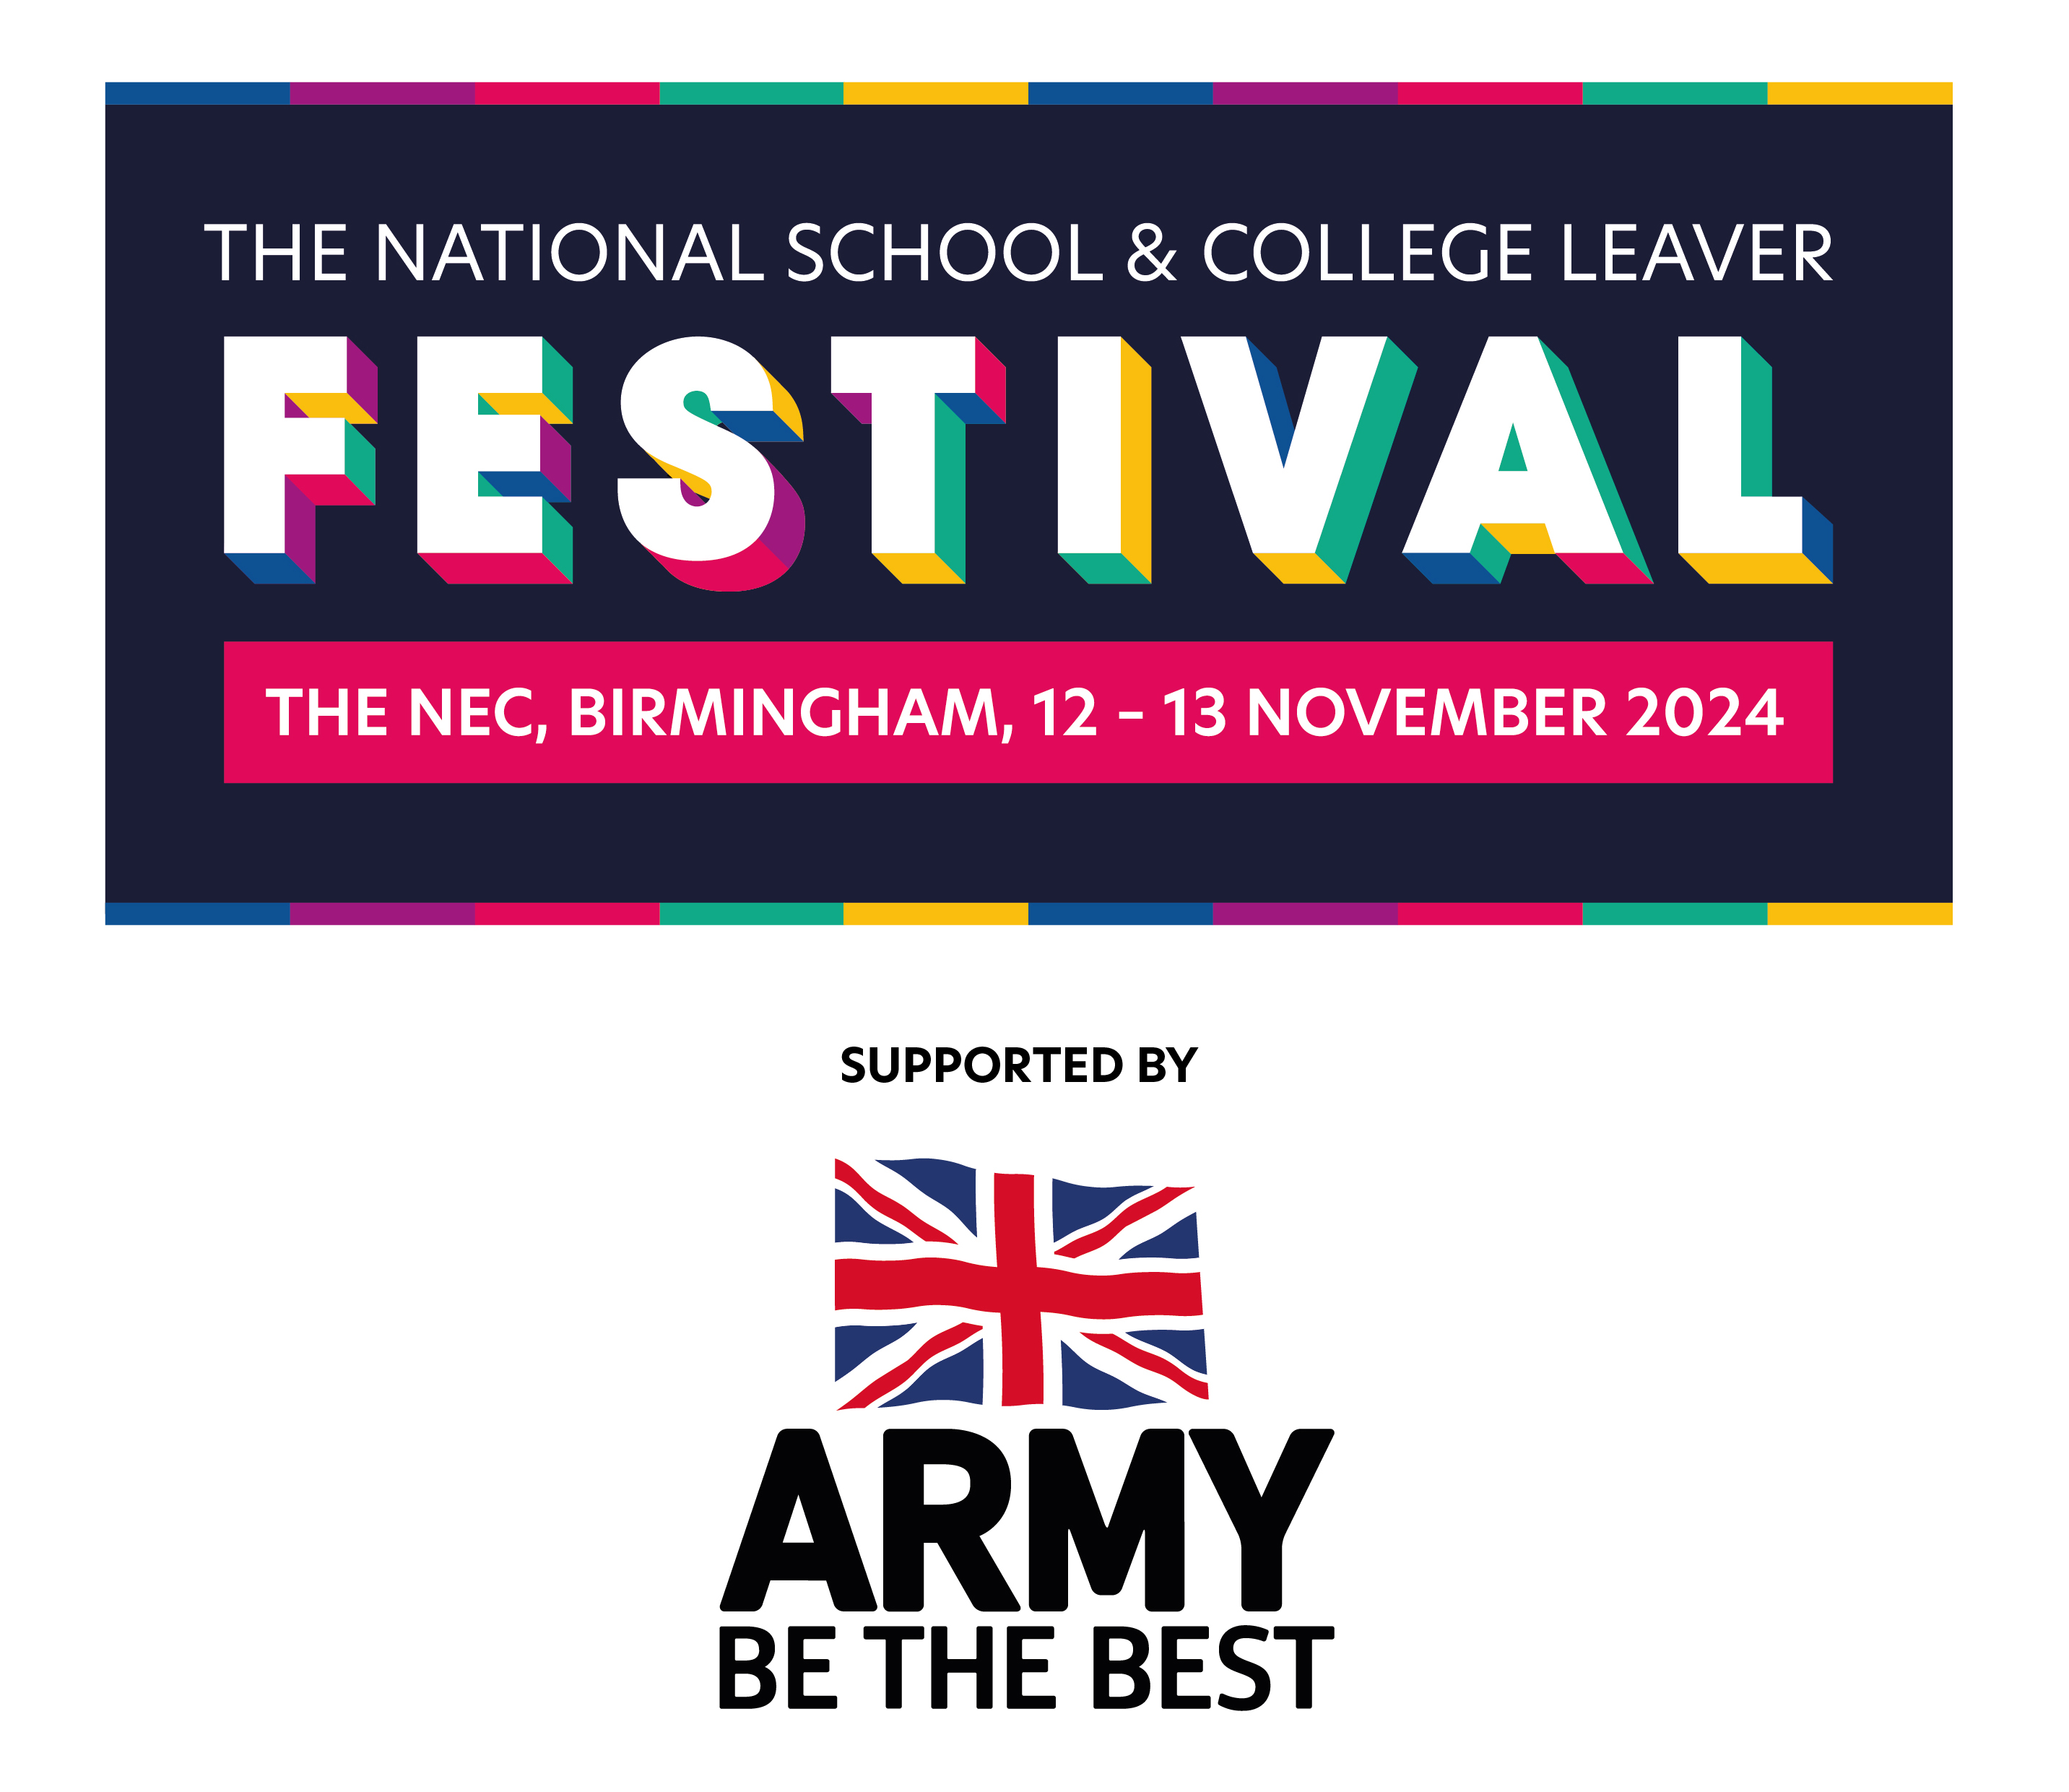 NSCL FEST 2024 with ARMY LOGO STACKED - Louise Burns.jpg